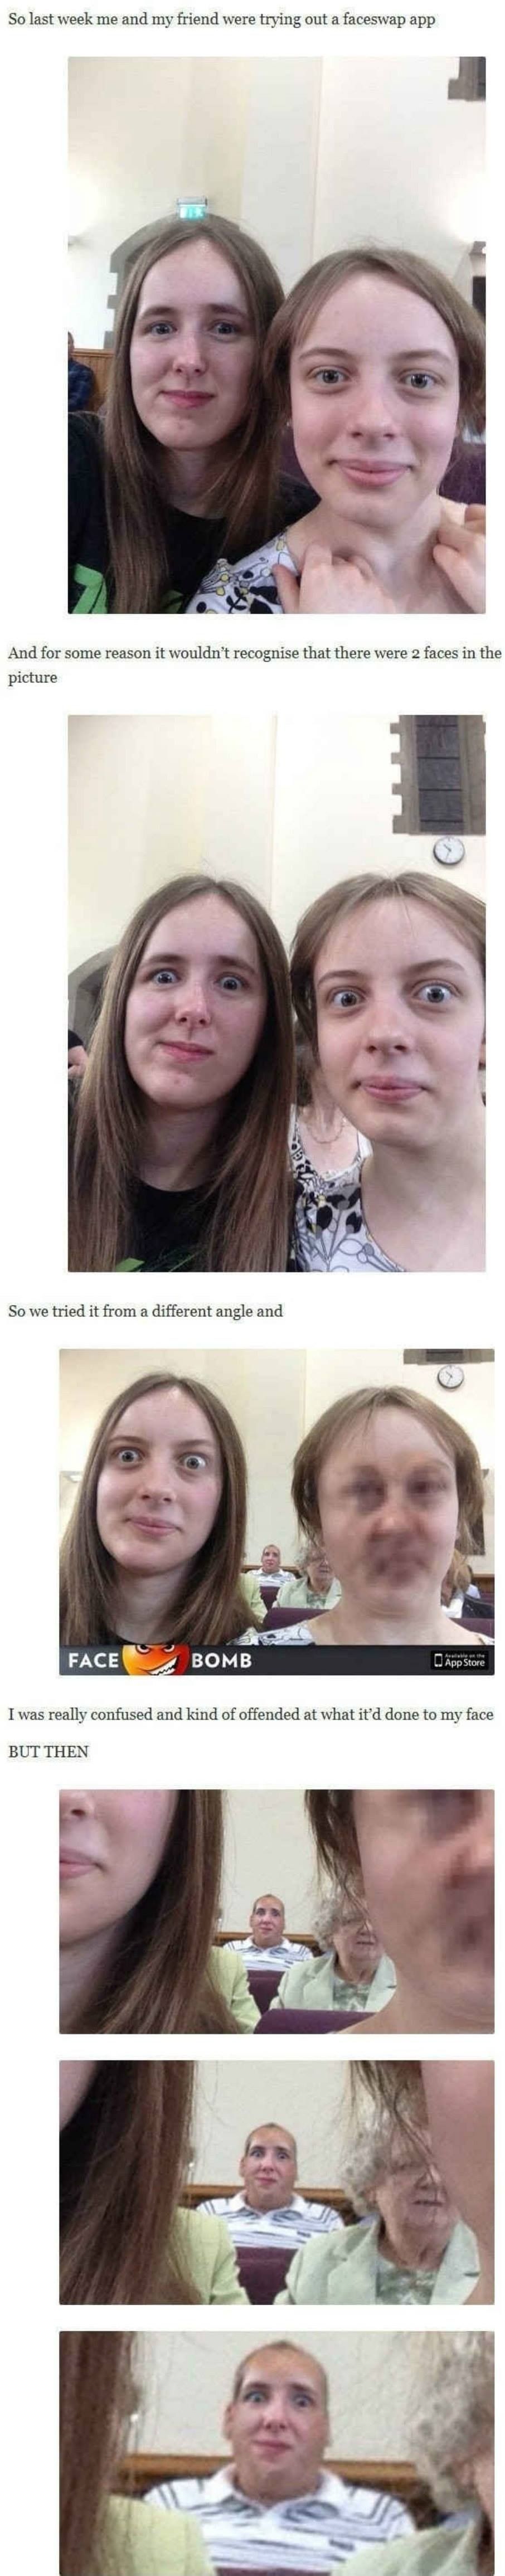 Why can't the faces swap?